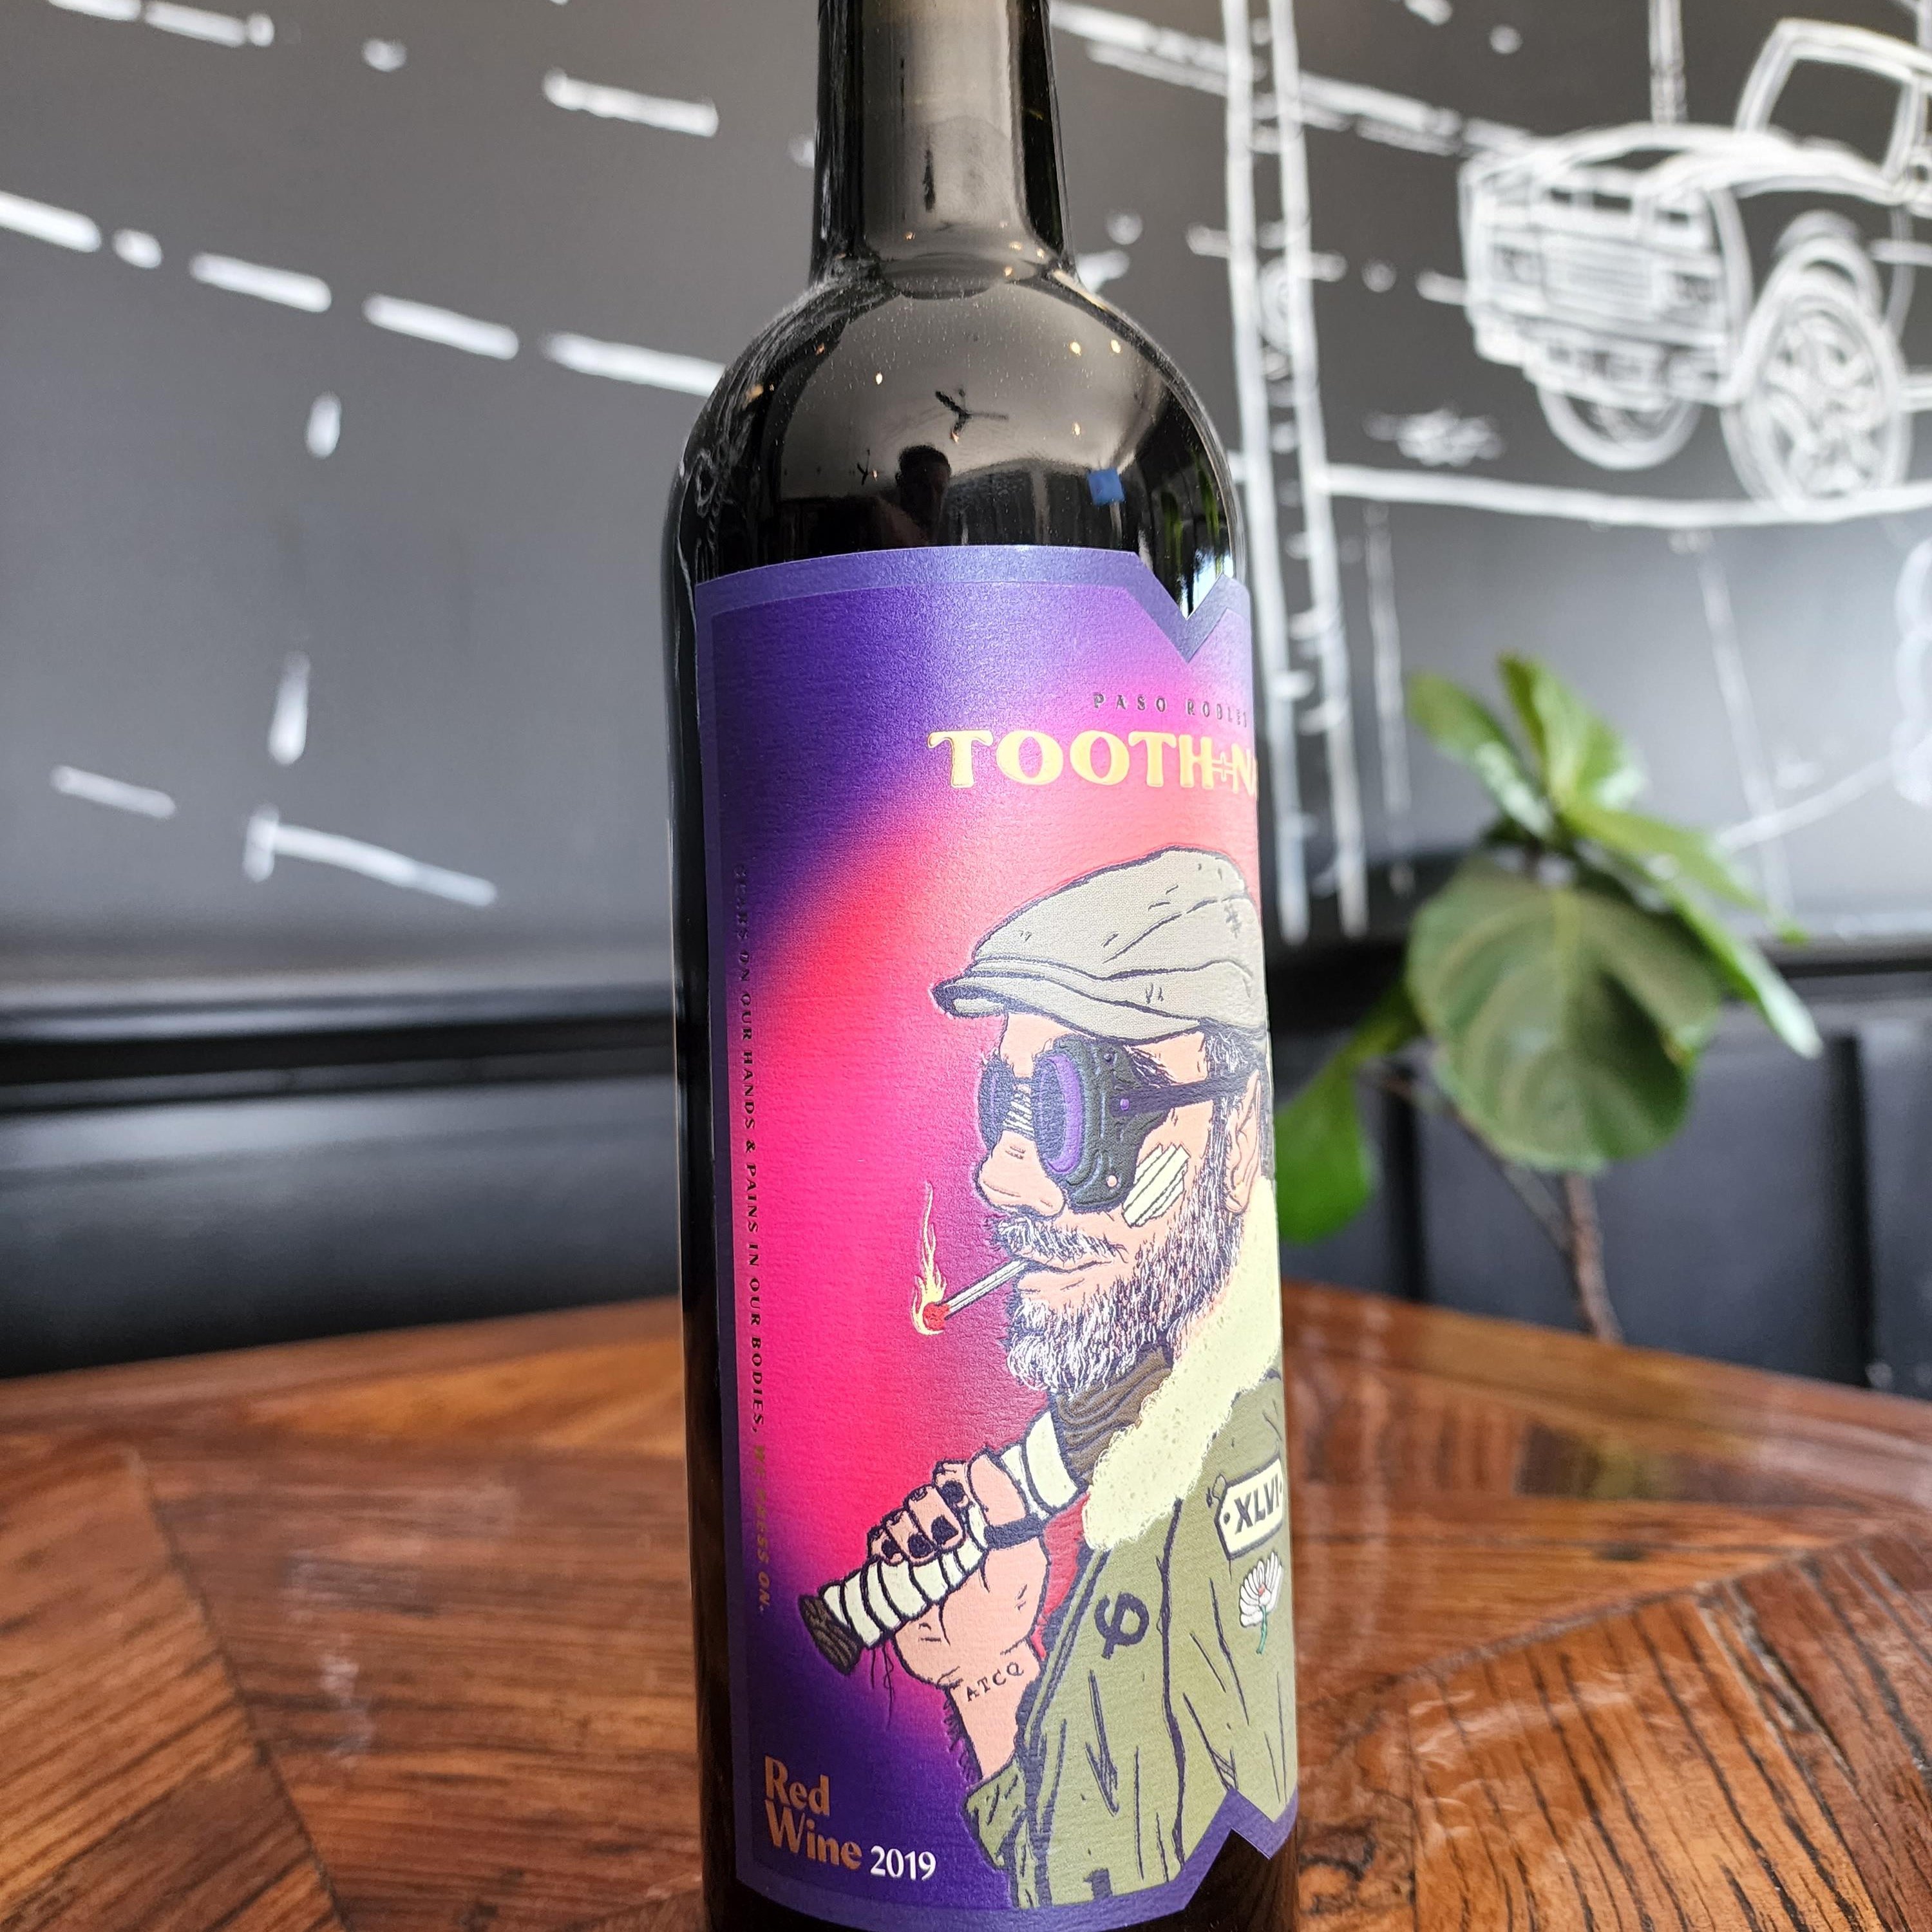 Tooth & Nail Red Blend Bottle